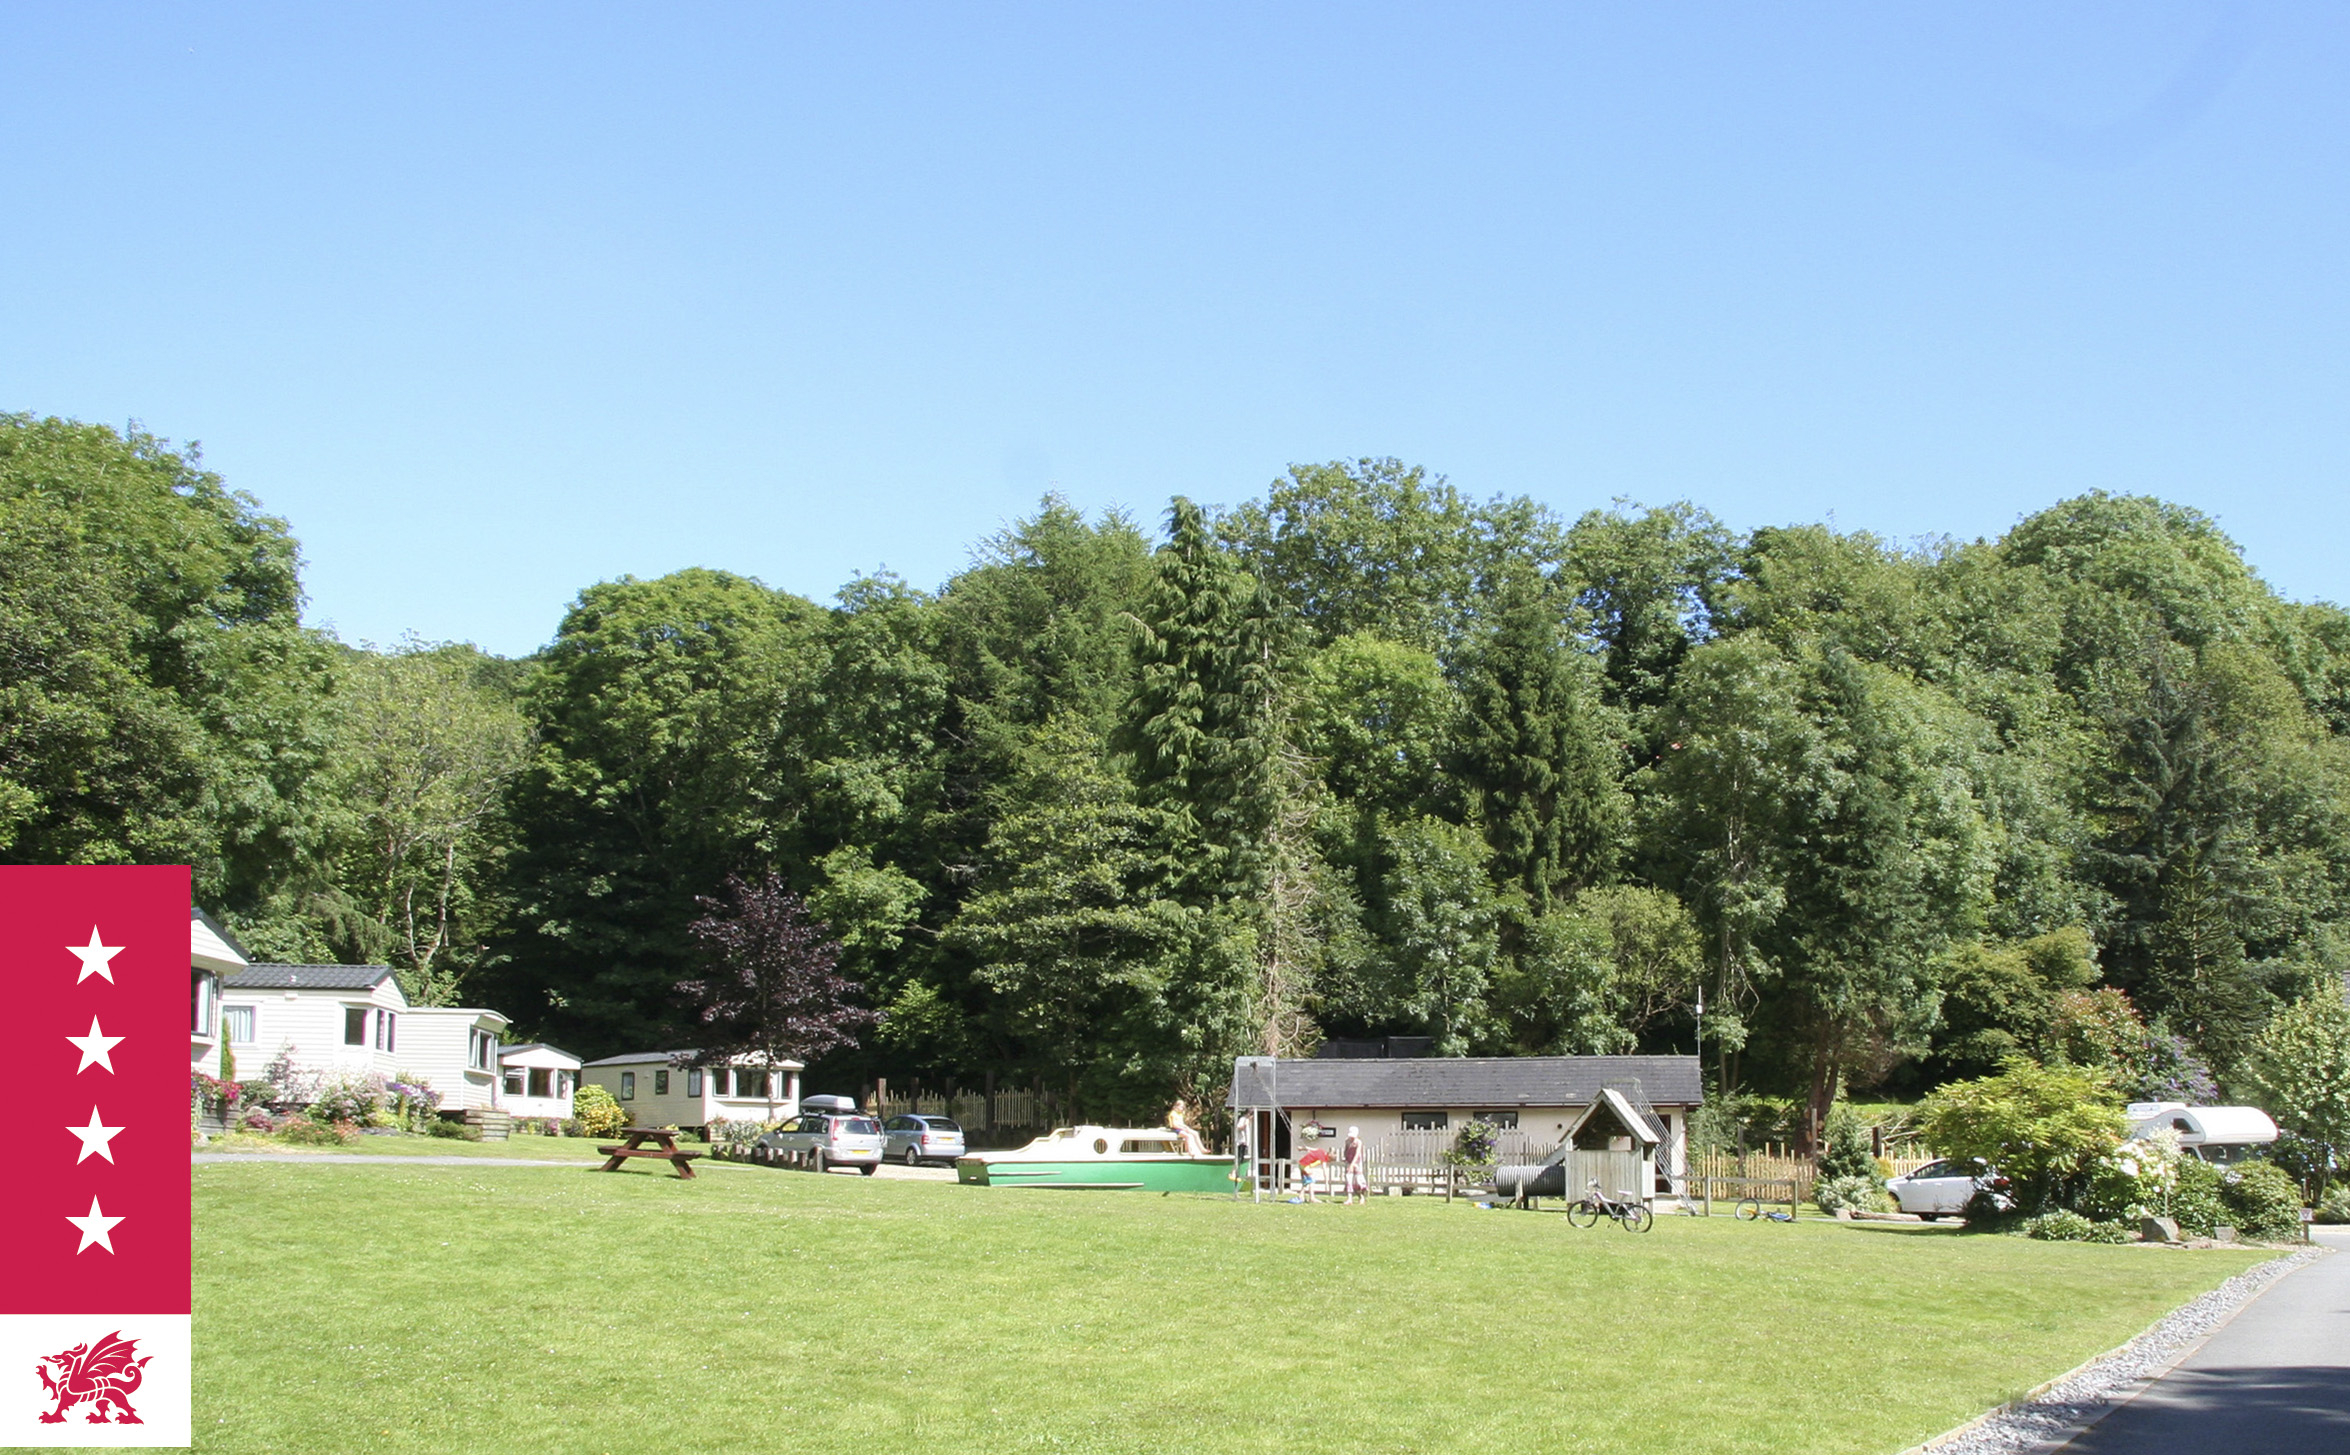 Mill House Caravan Park - the one with the boat in the play area